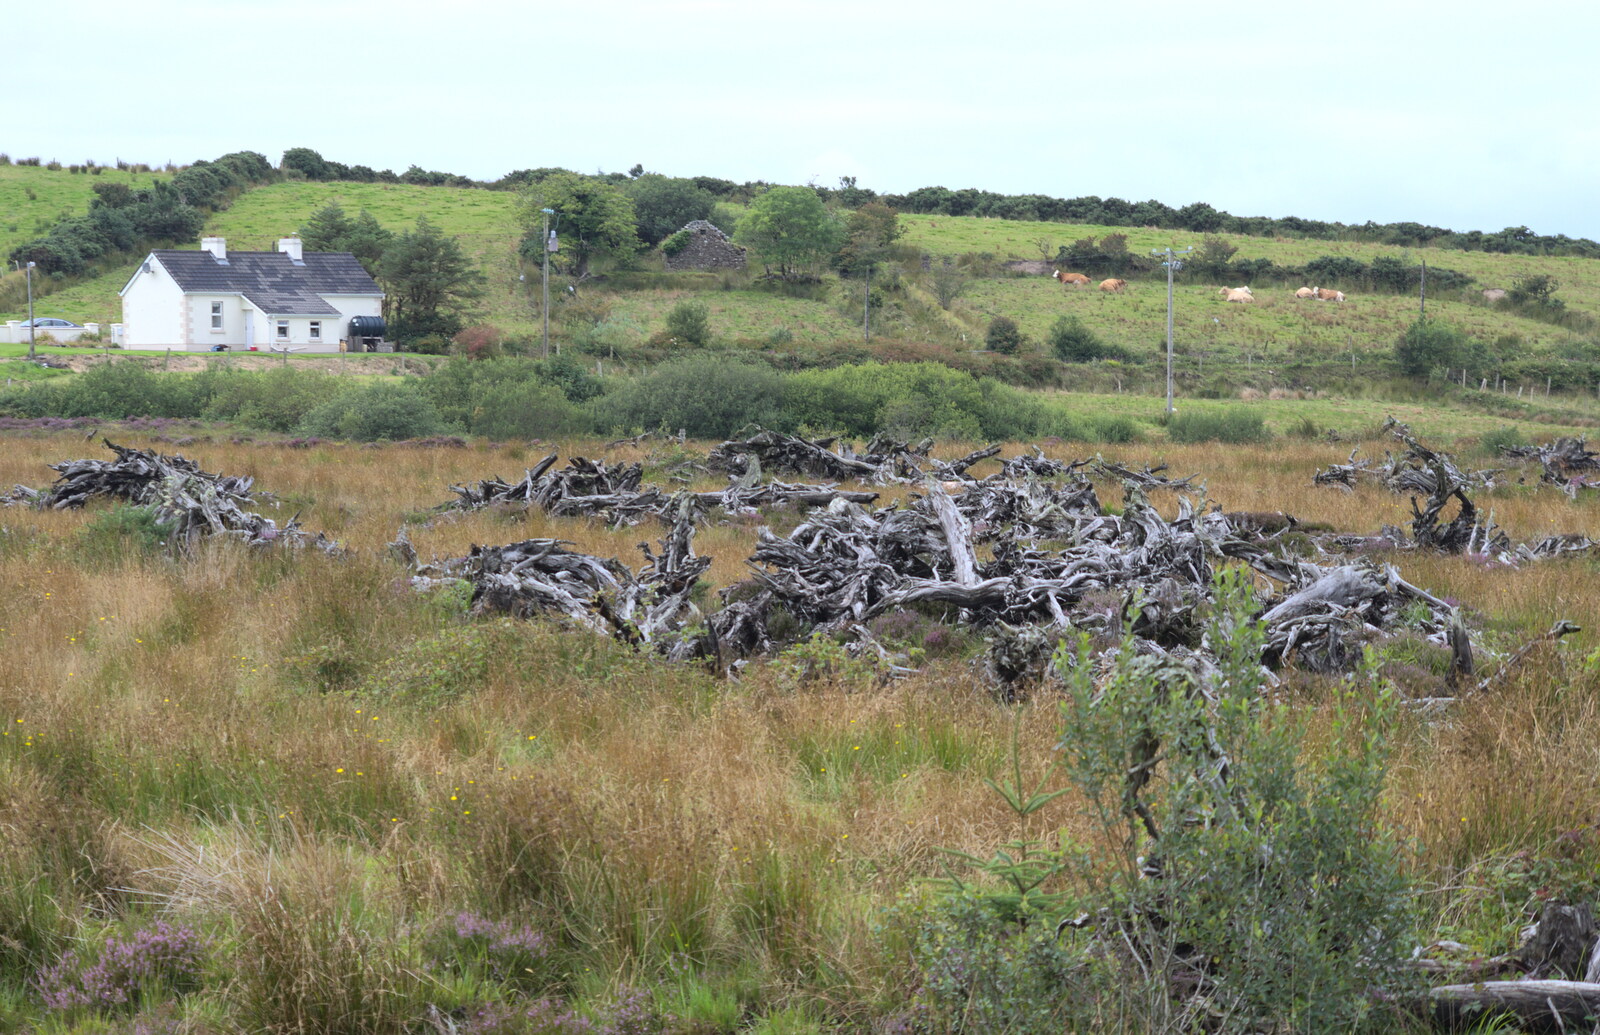 Piles of 'bog oak' in a field near Newport from From Achill to Strokestown, Mayo and Roscommon, Ireland - 10th August 2017